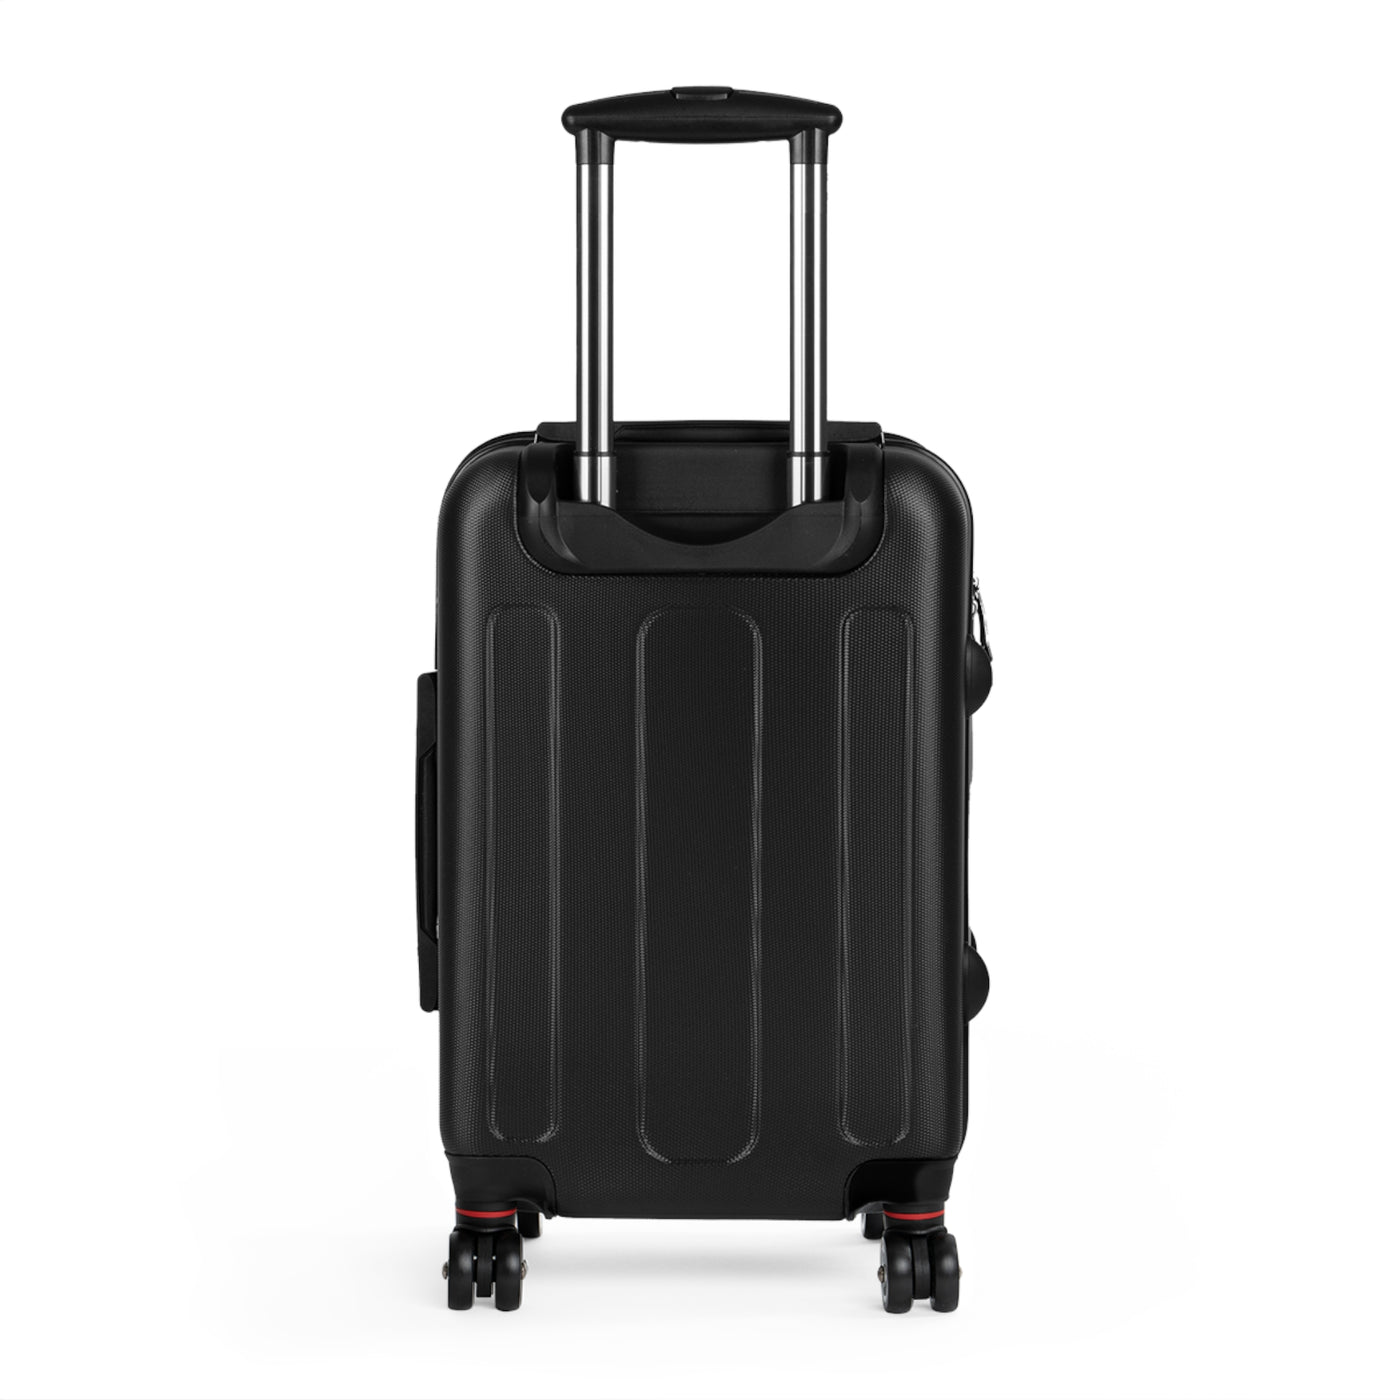 IT'S ON MY LIST Thin Suitcase - 3 sizes